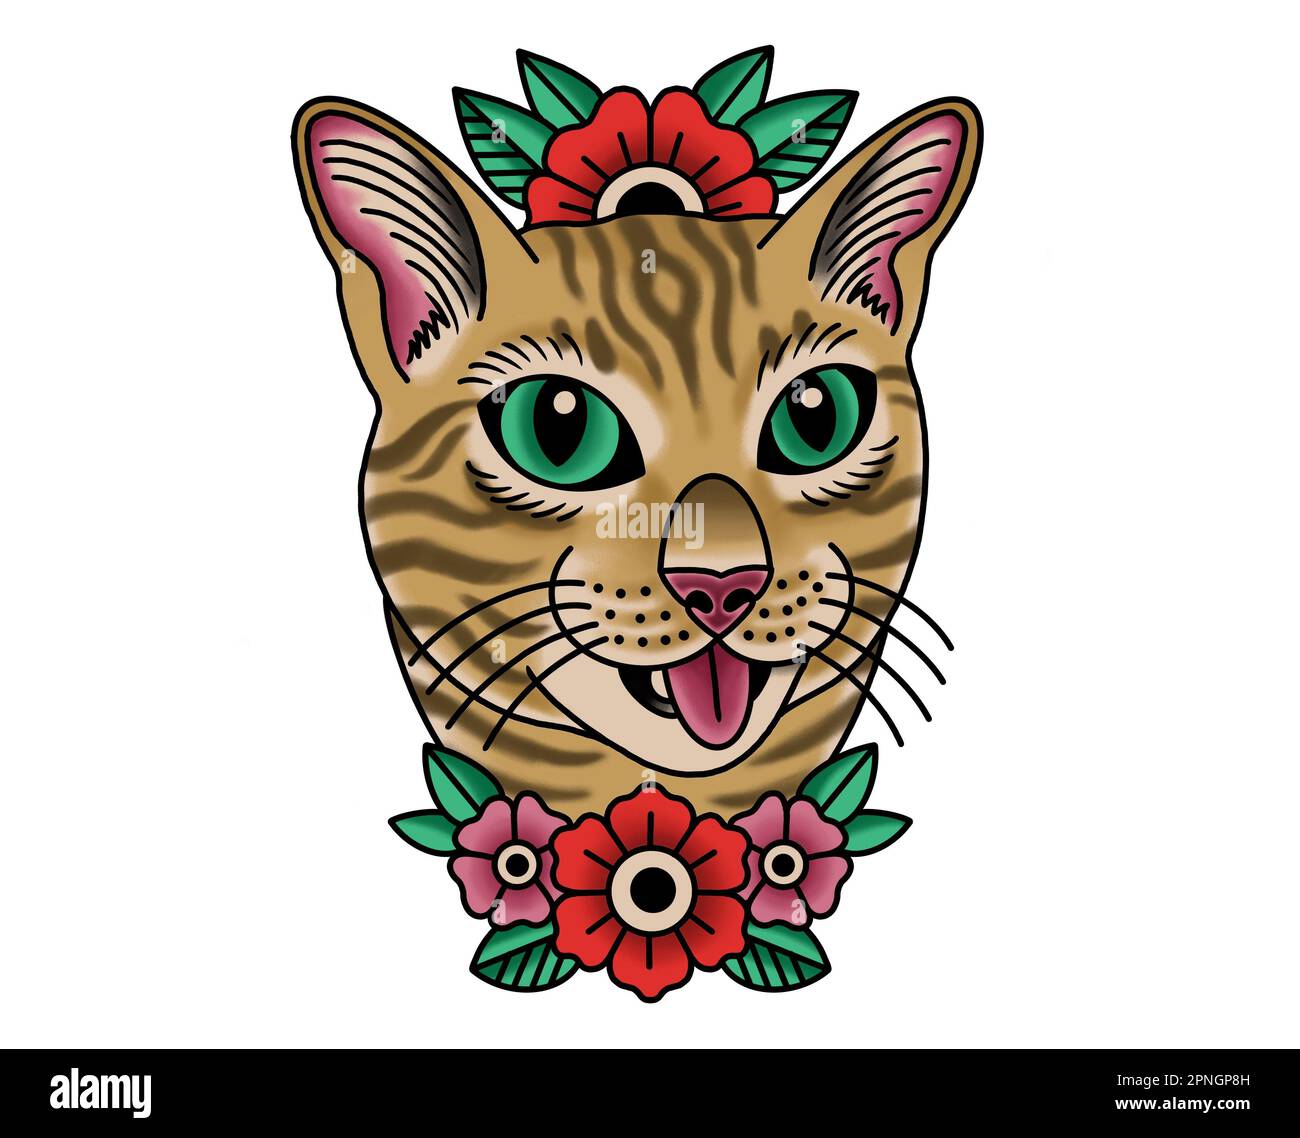 Cute funny tabby Cat portrait with flowers, full color on white background inspired by tattoo art style Stock Photo